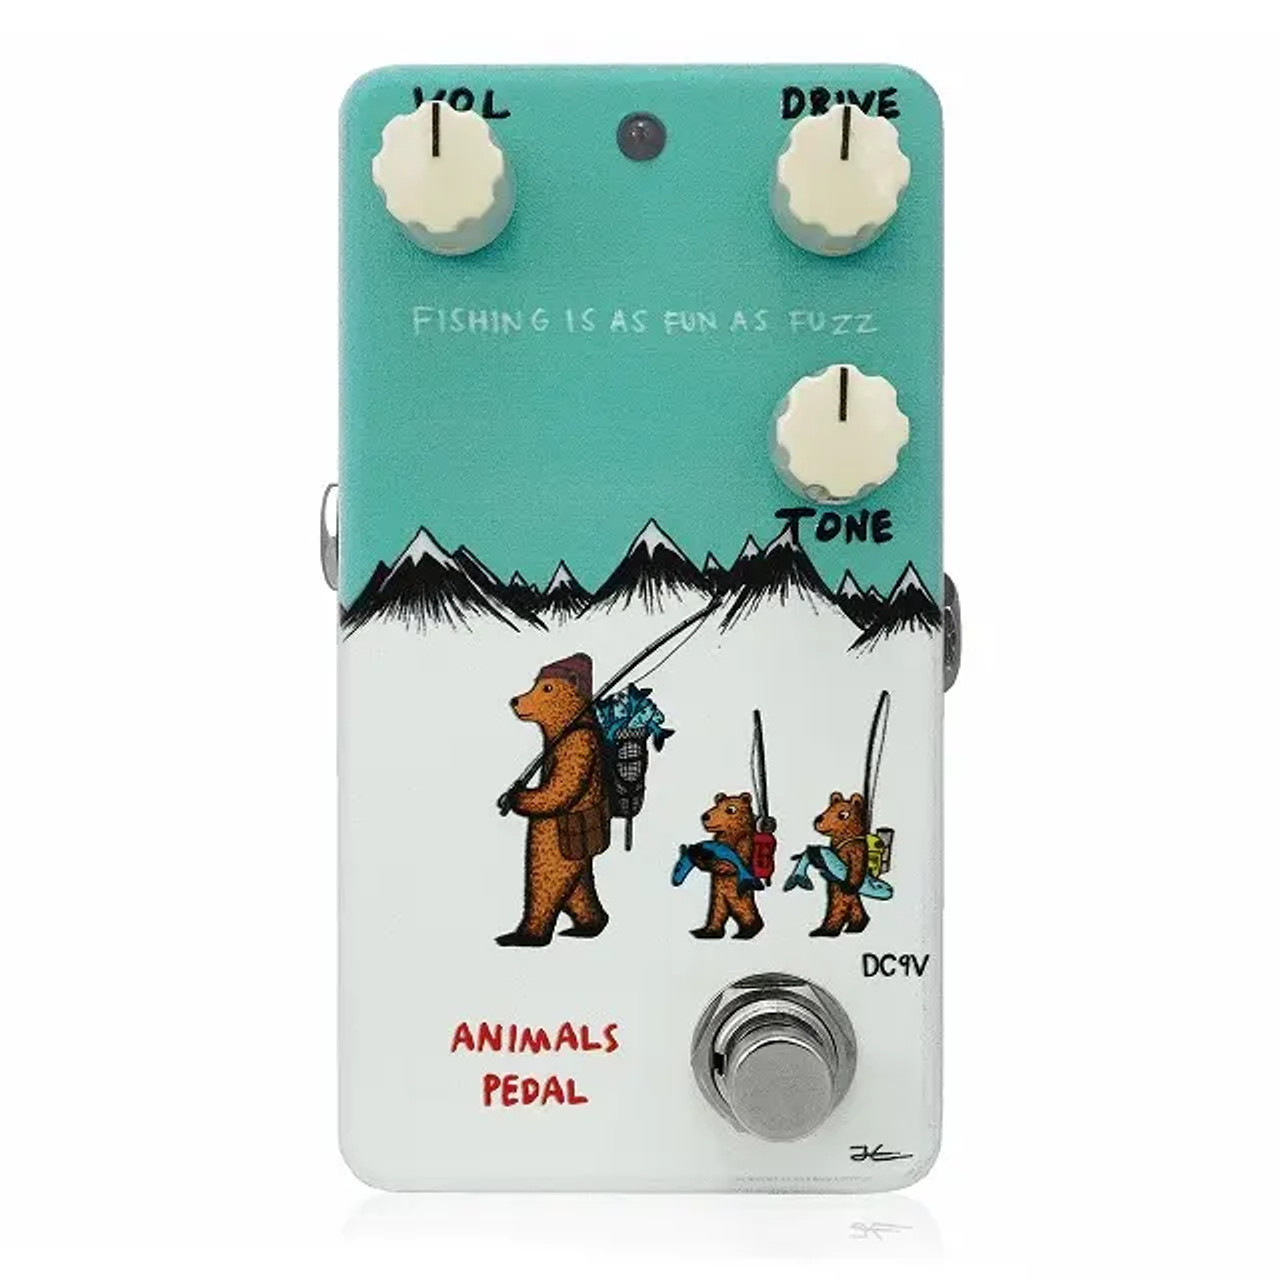 Animals Pedal Fishing Is As Fun As Fuzz Pedal v2 - The Music Den